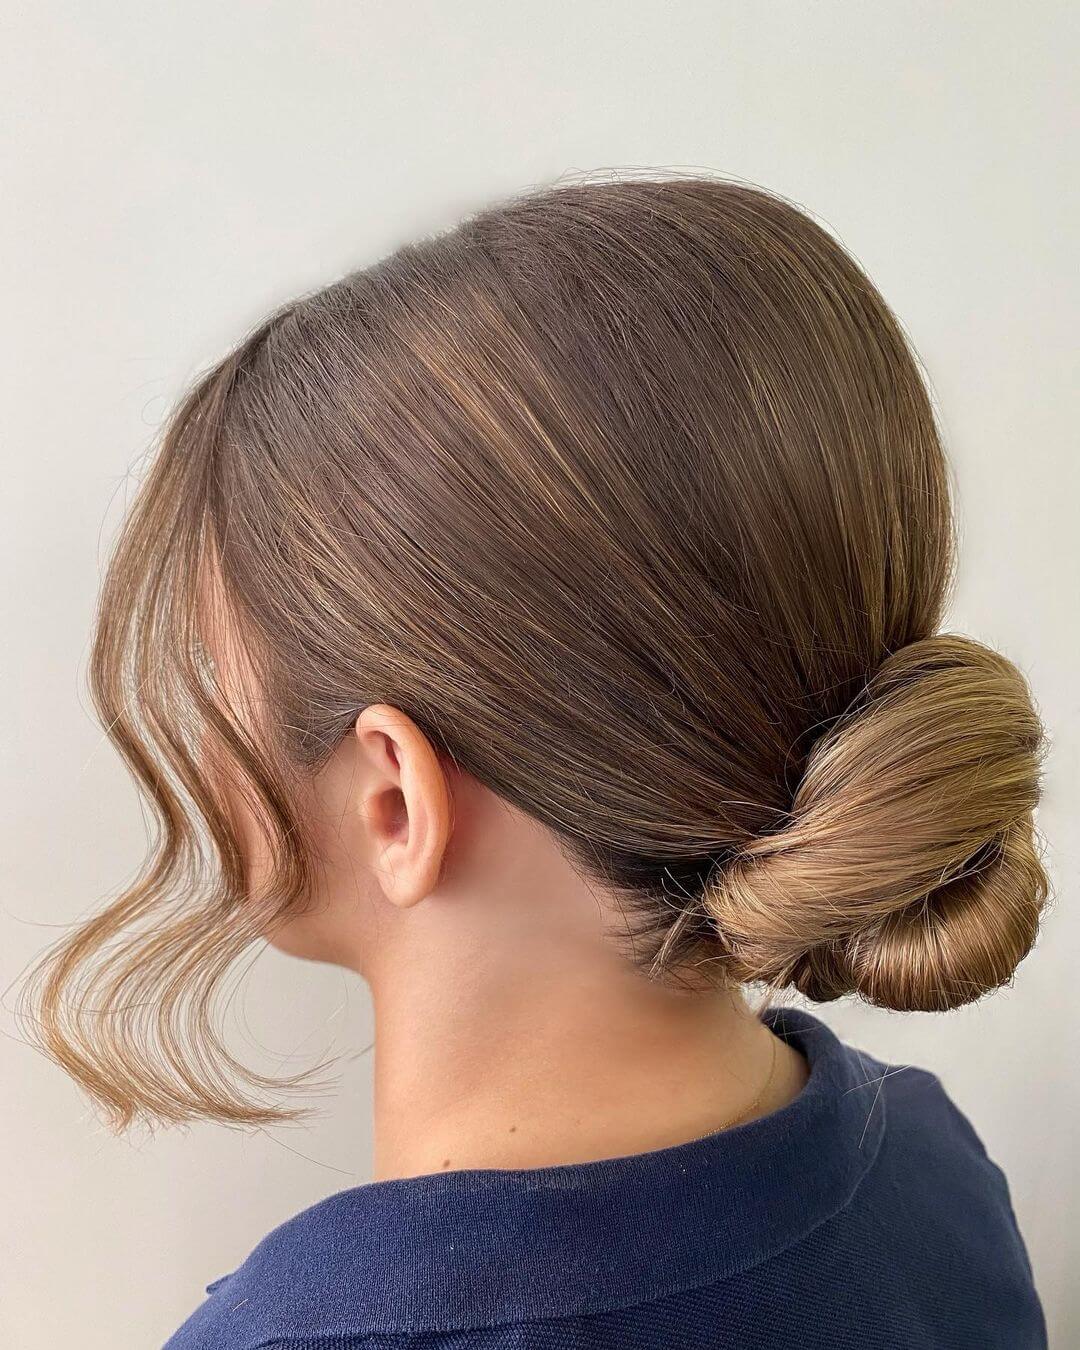 16 Simple Hairstyles for Work That Will Make You Look Professional   College Fashion